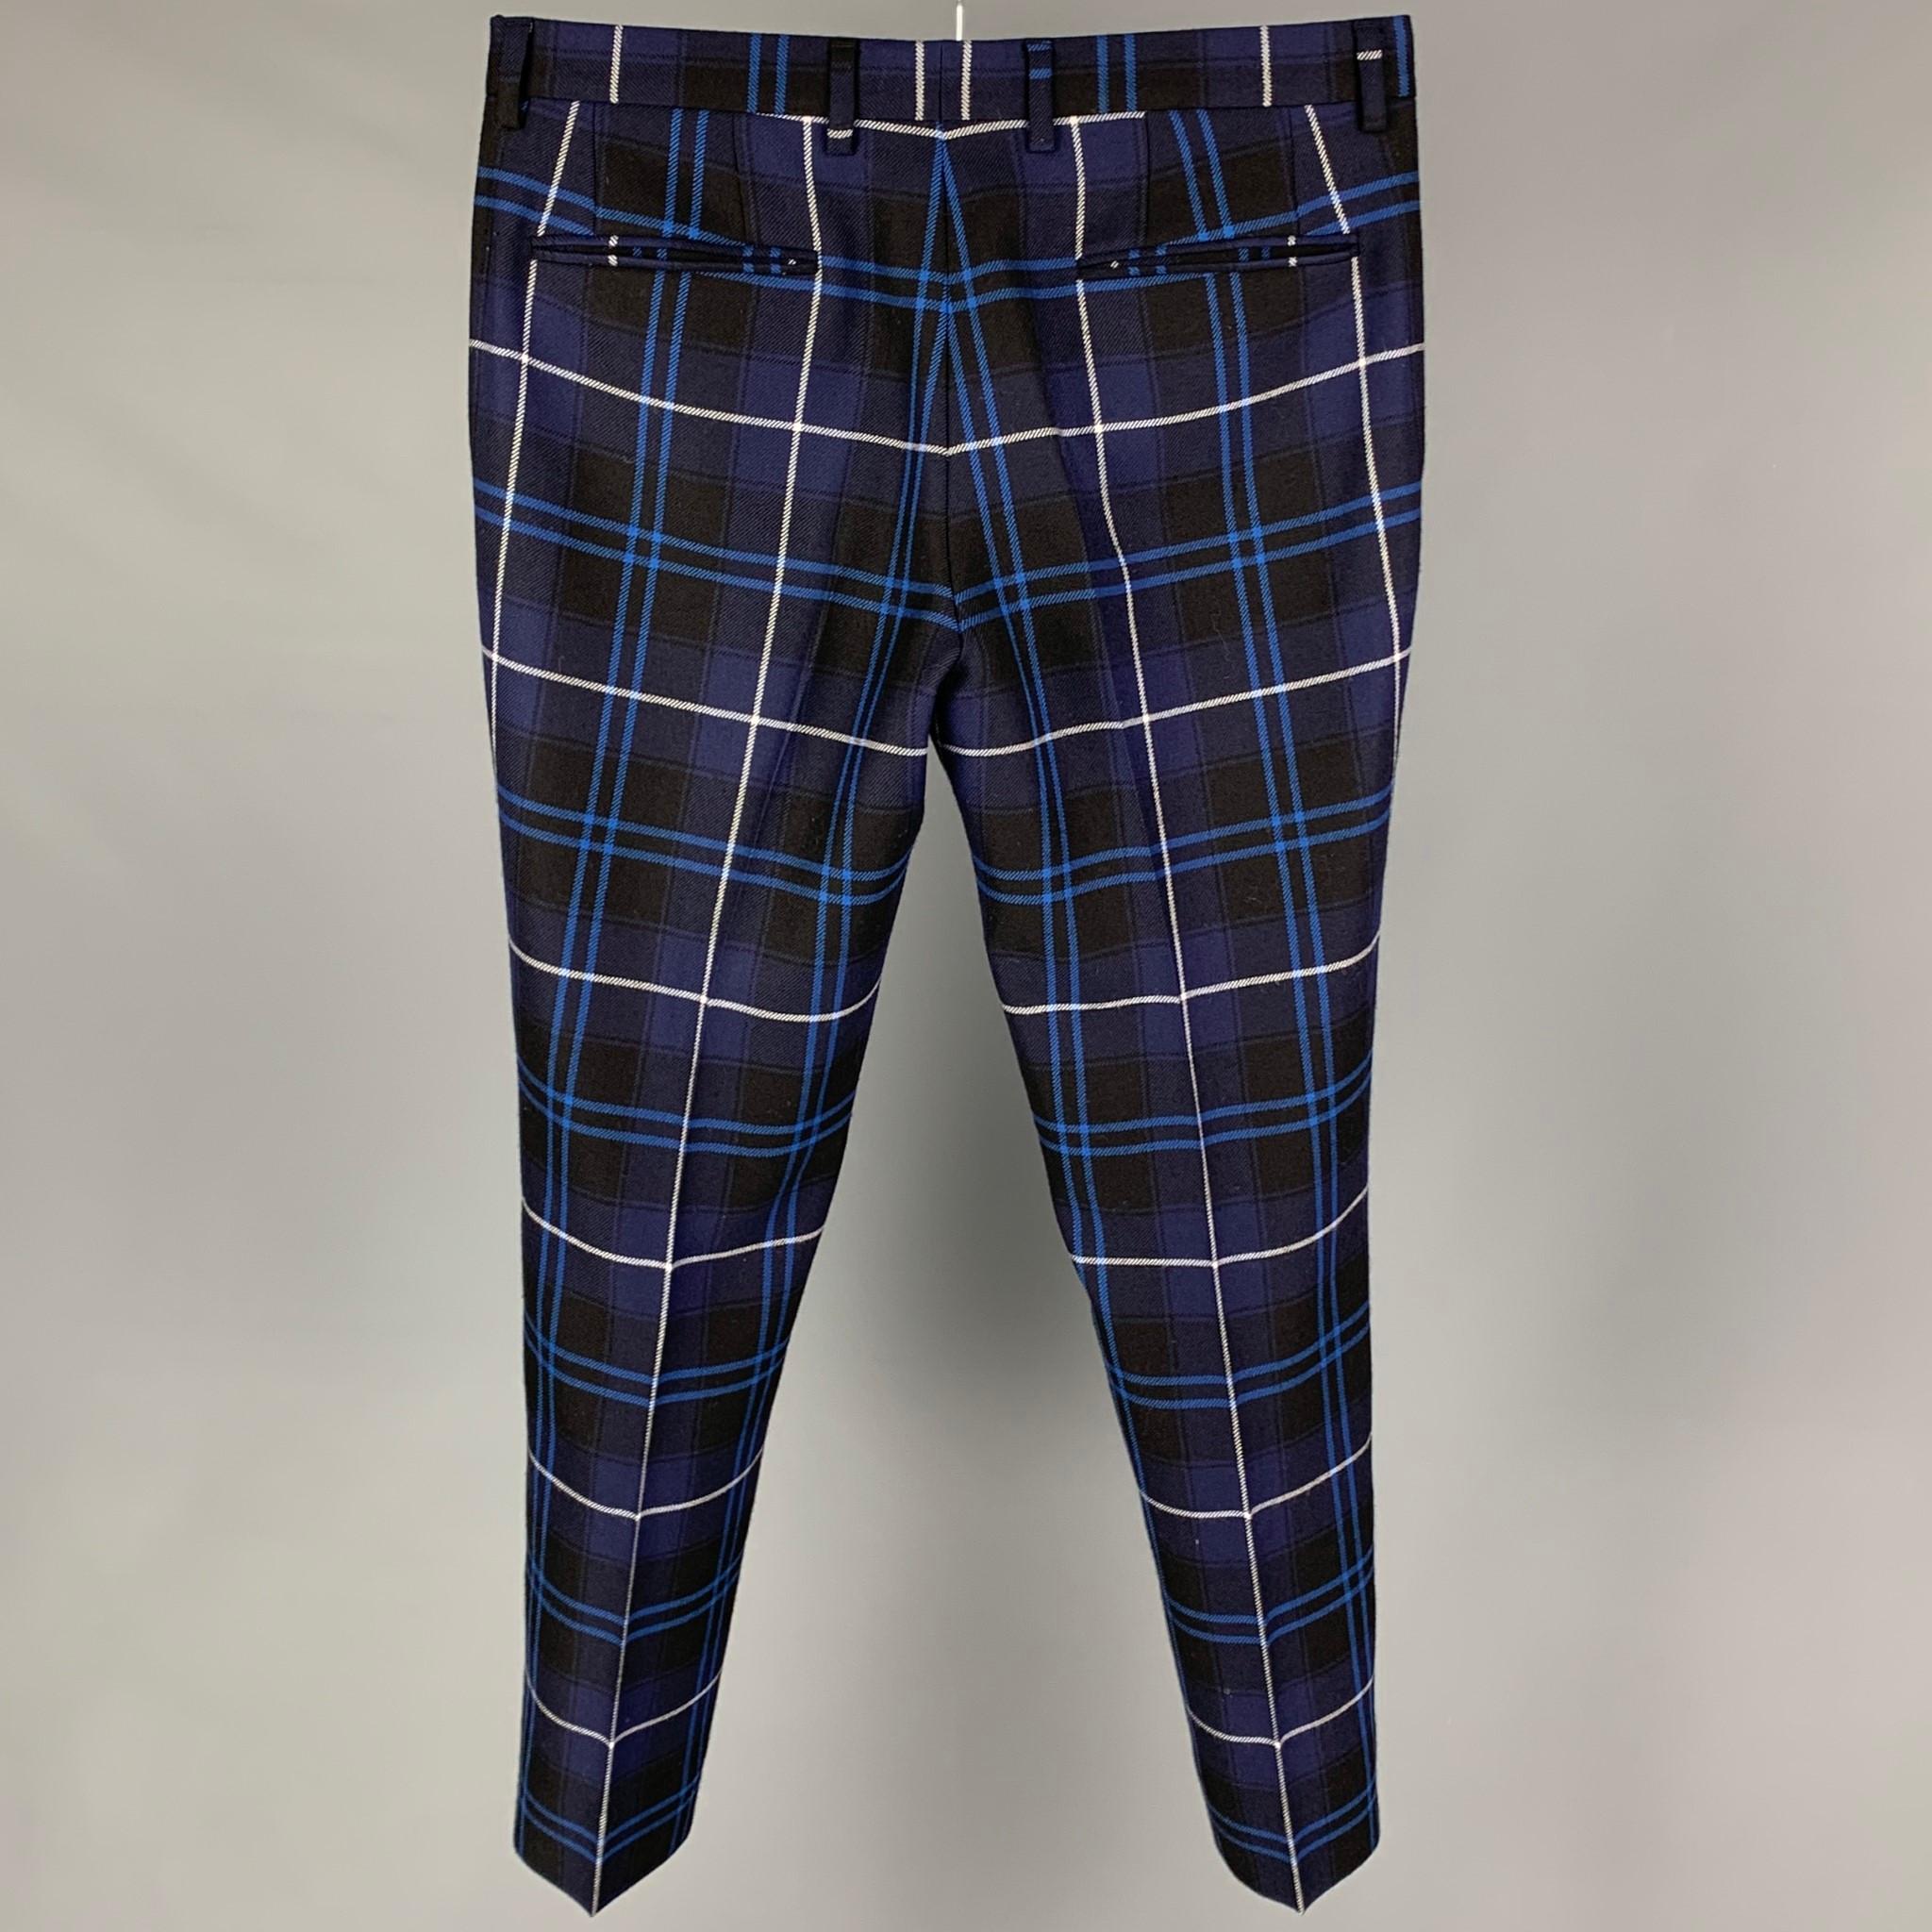 VERSACE dress pants comes in a navy & black plaid wool featuring a flat front and a zip fly closure. Made in Italy. 

Excellent Pre-Owned Condition.
Marked: 48

Measurements:

Waist: 33 in.
Rise: 9.5 in.
Inseam: 30 in.